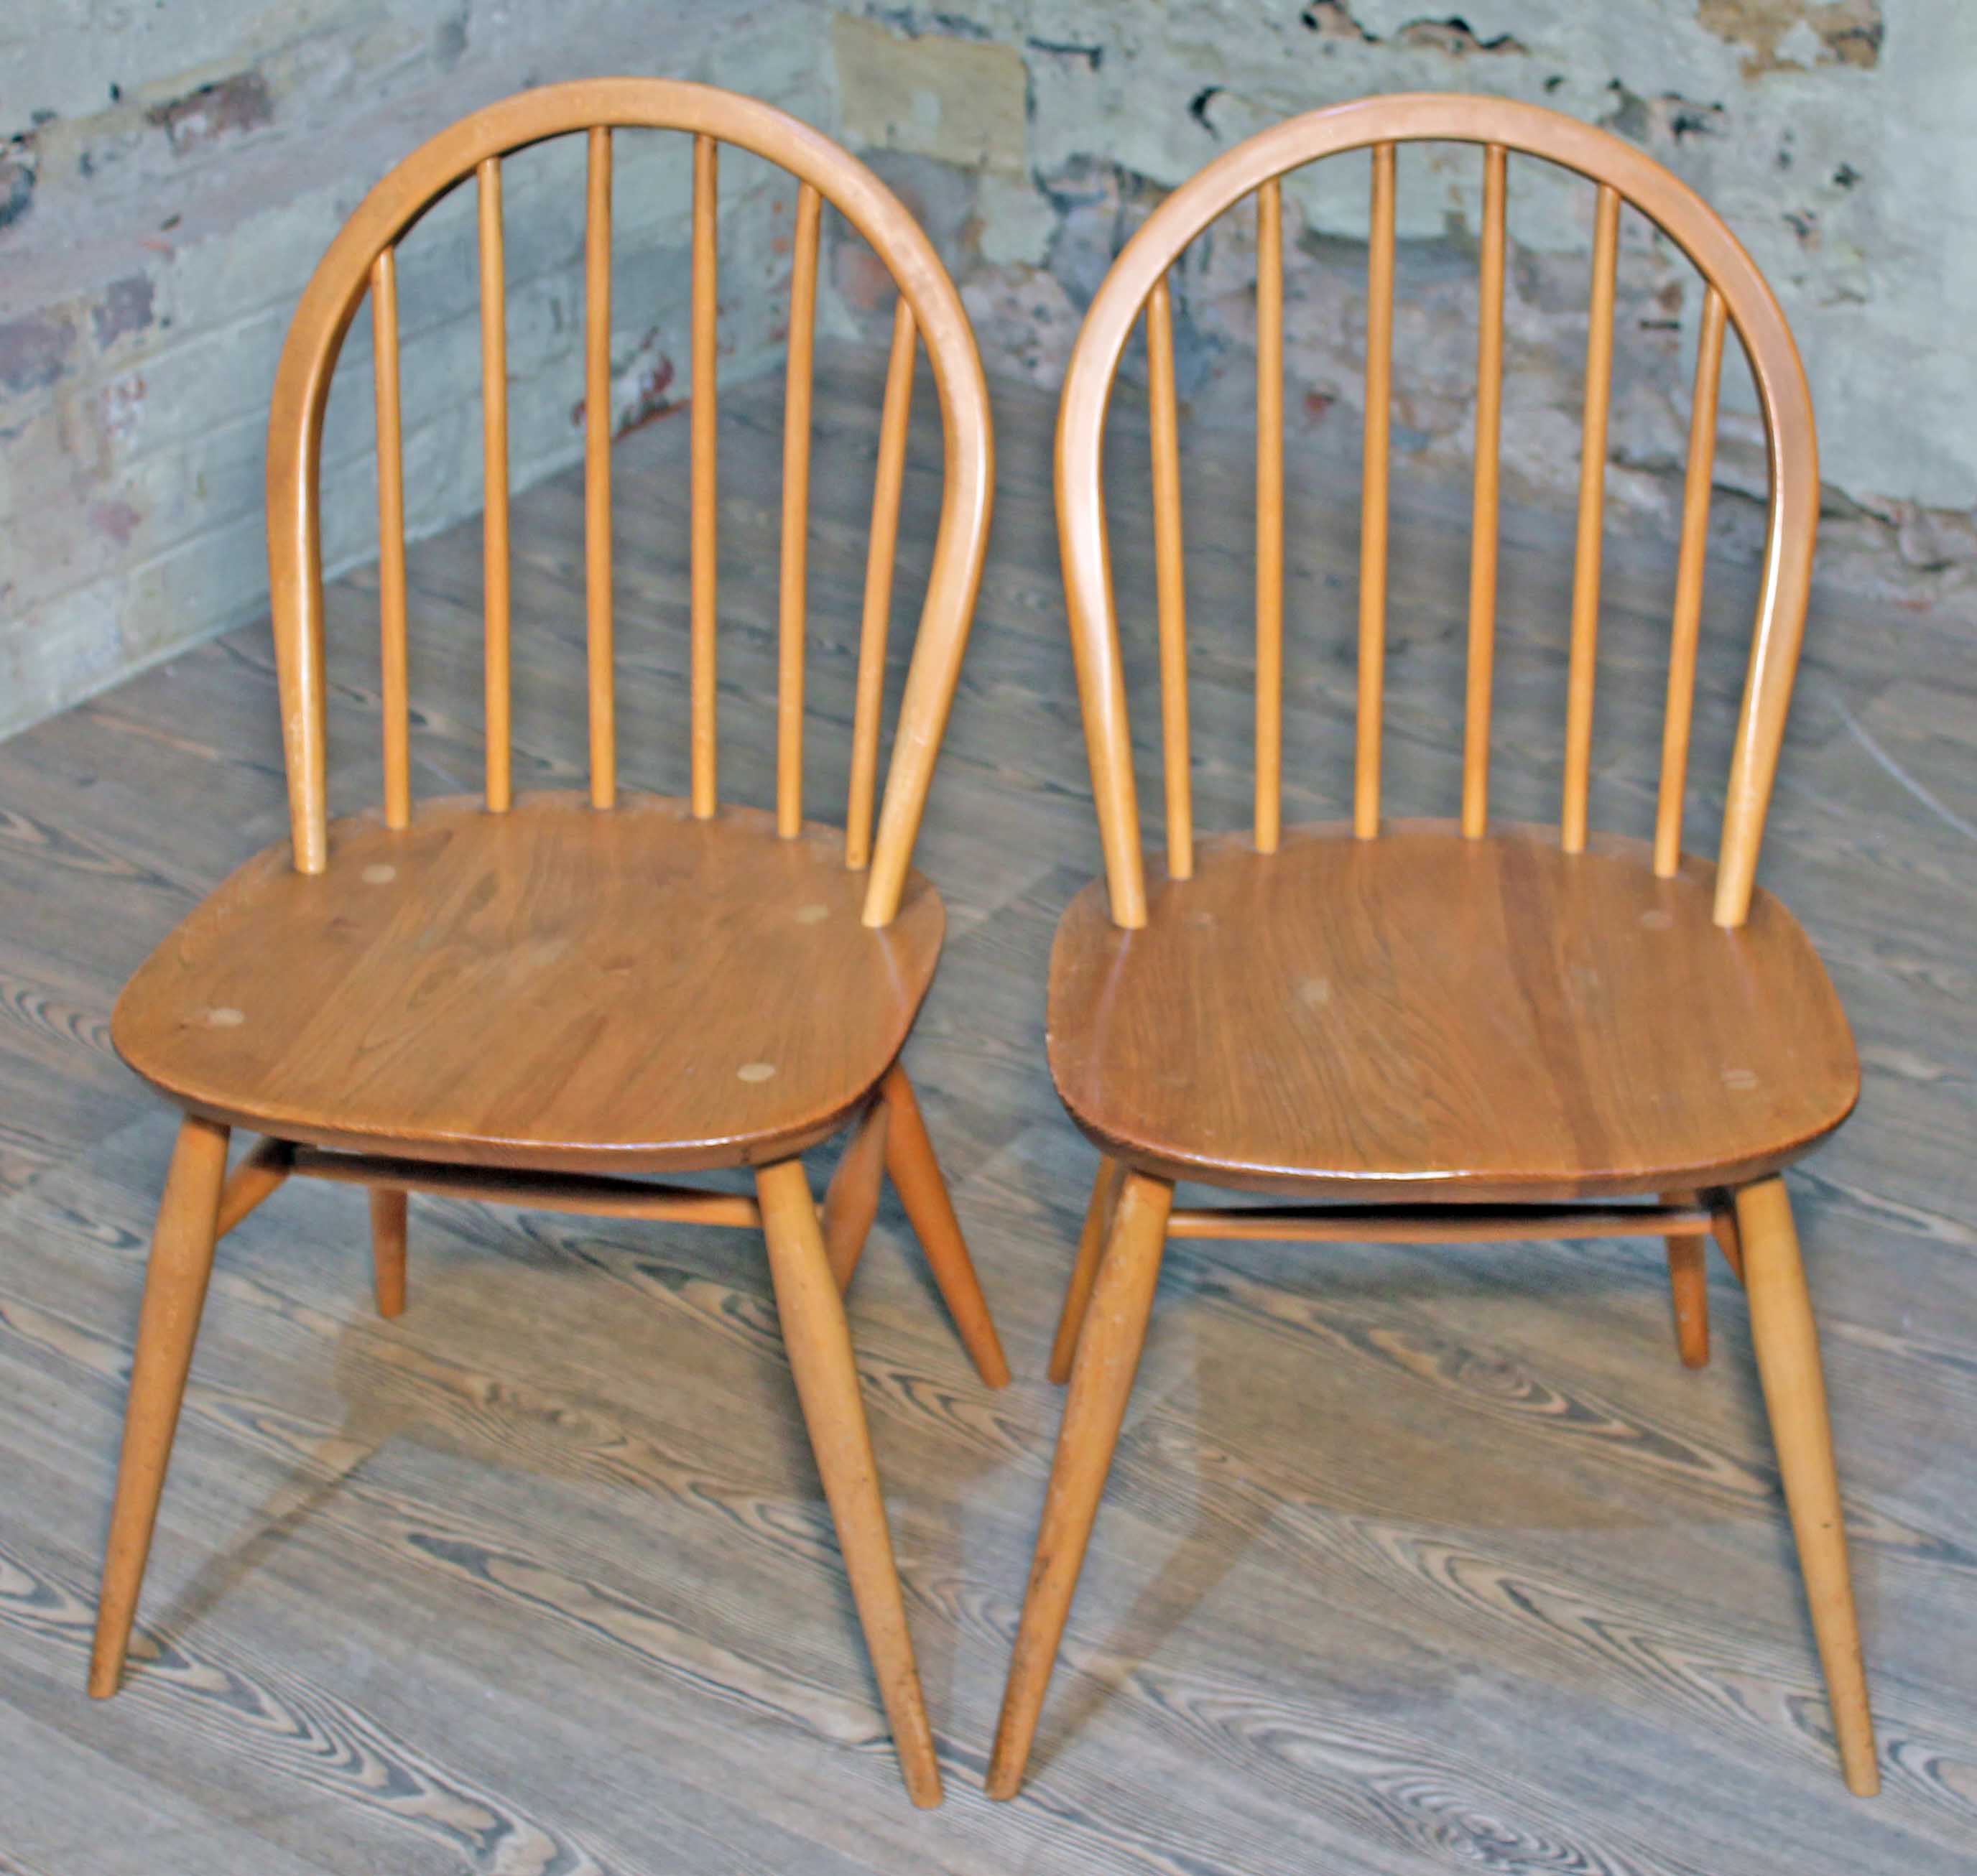 A pair of Ercol Blonde elm and beech spindle back chairs. Condition - good, minor wear.